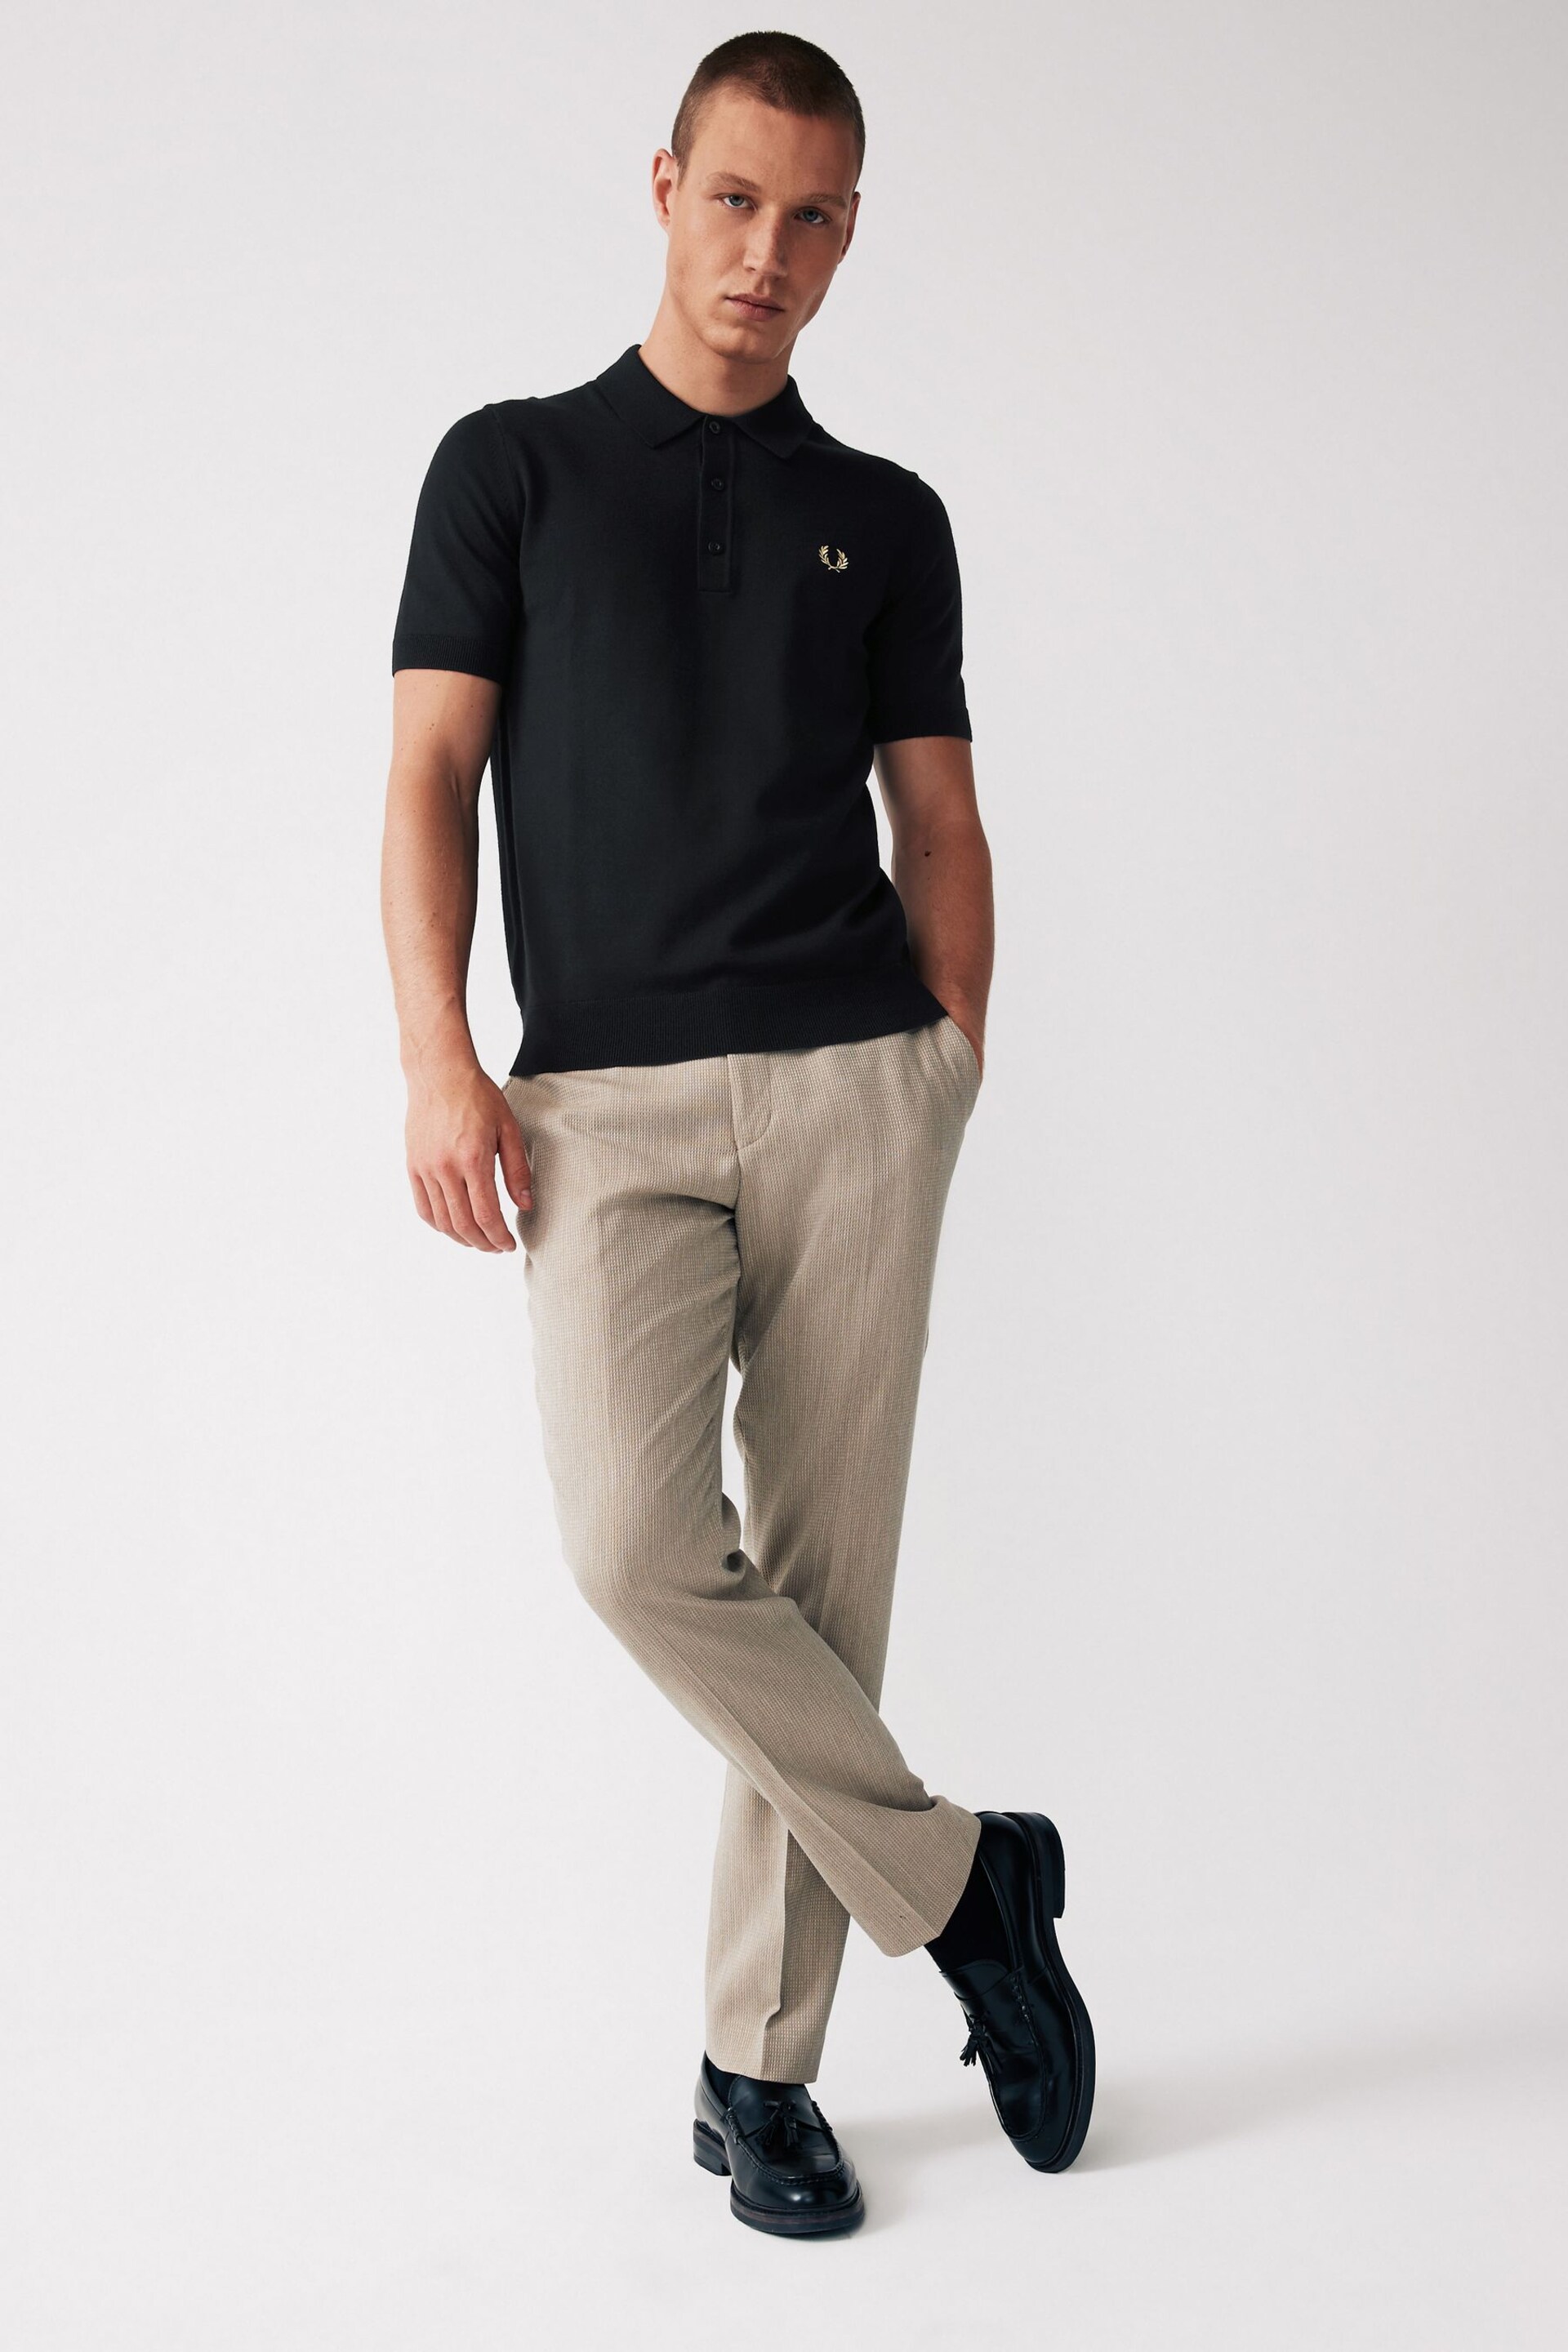 Fred Perry Merino Wool Blend Knitted Polo Shirt - Image 3 of 5